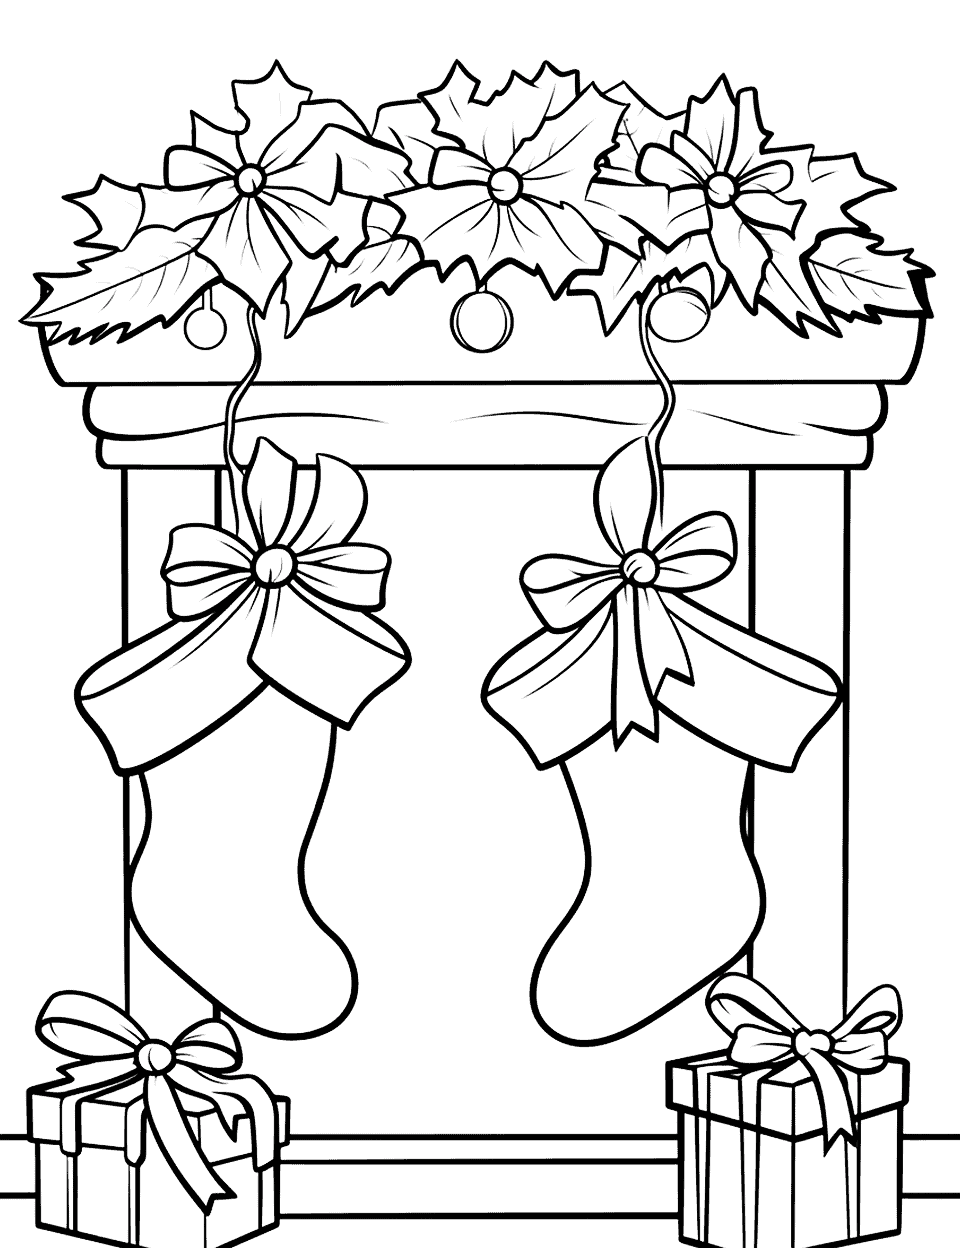 Festive Fireplace Christmas Coloring Page - A crackling fireplace with Christmas stockings hanging on the mantel.